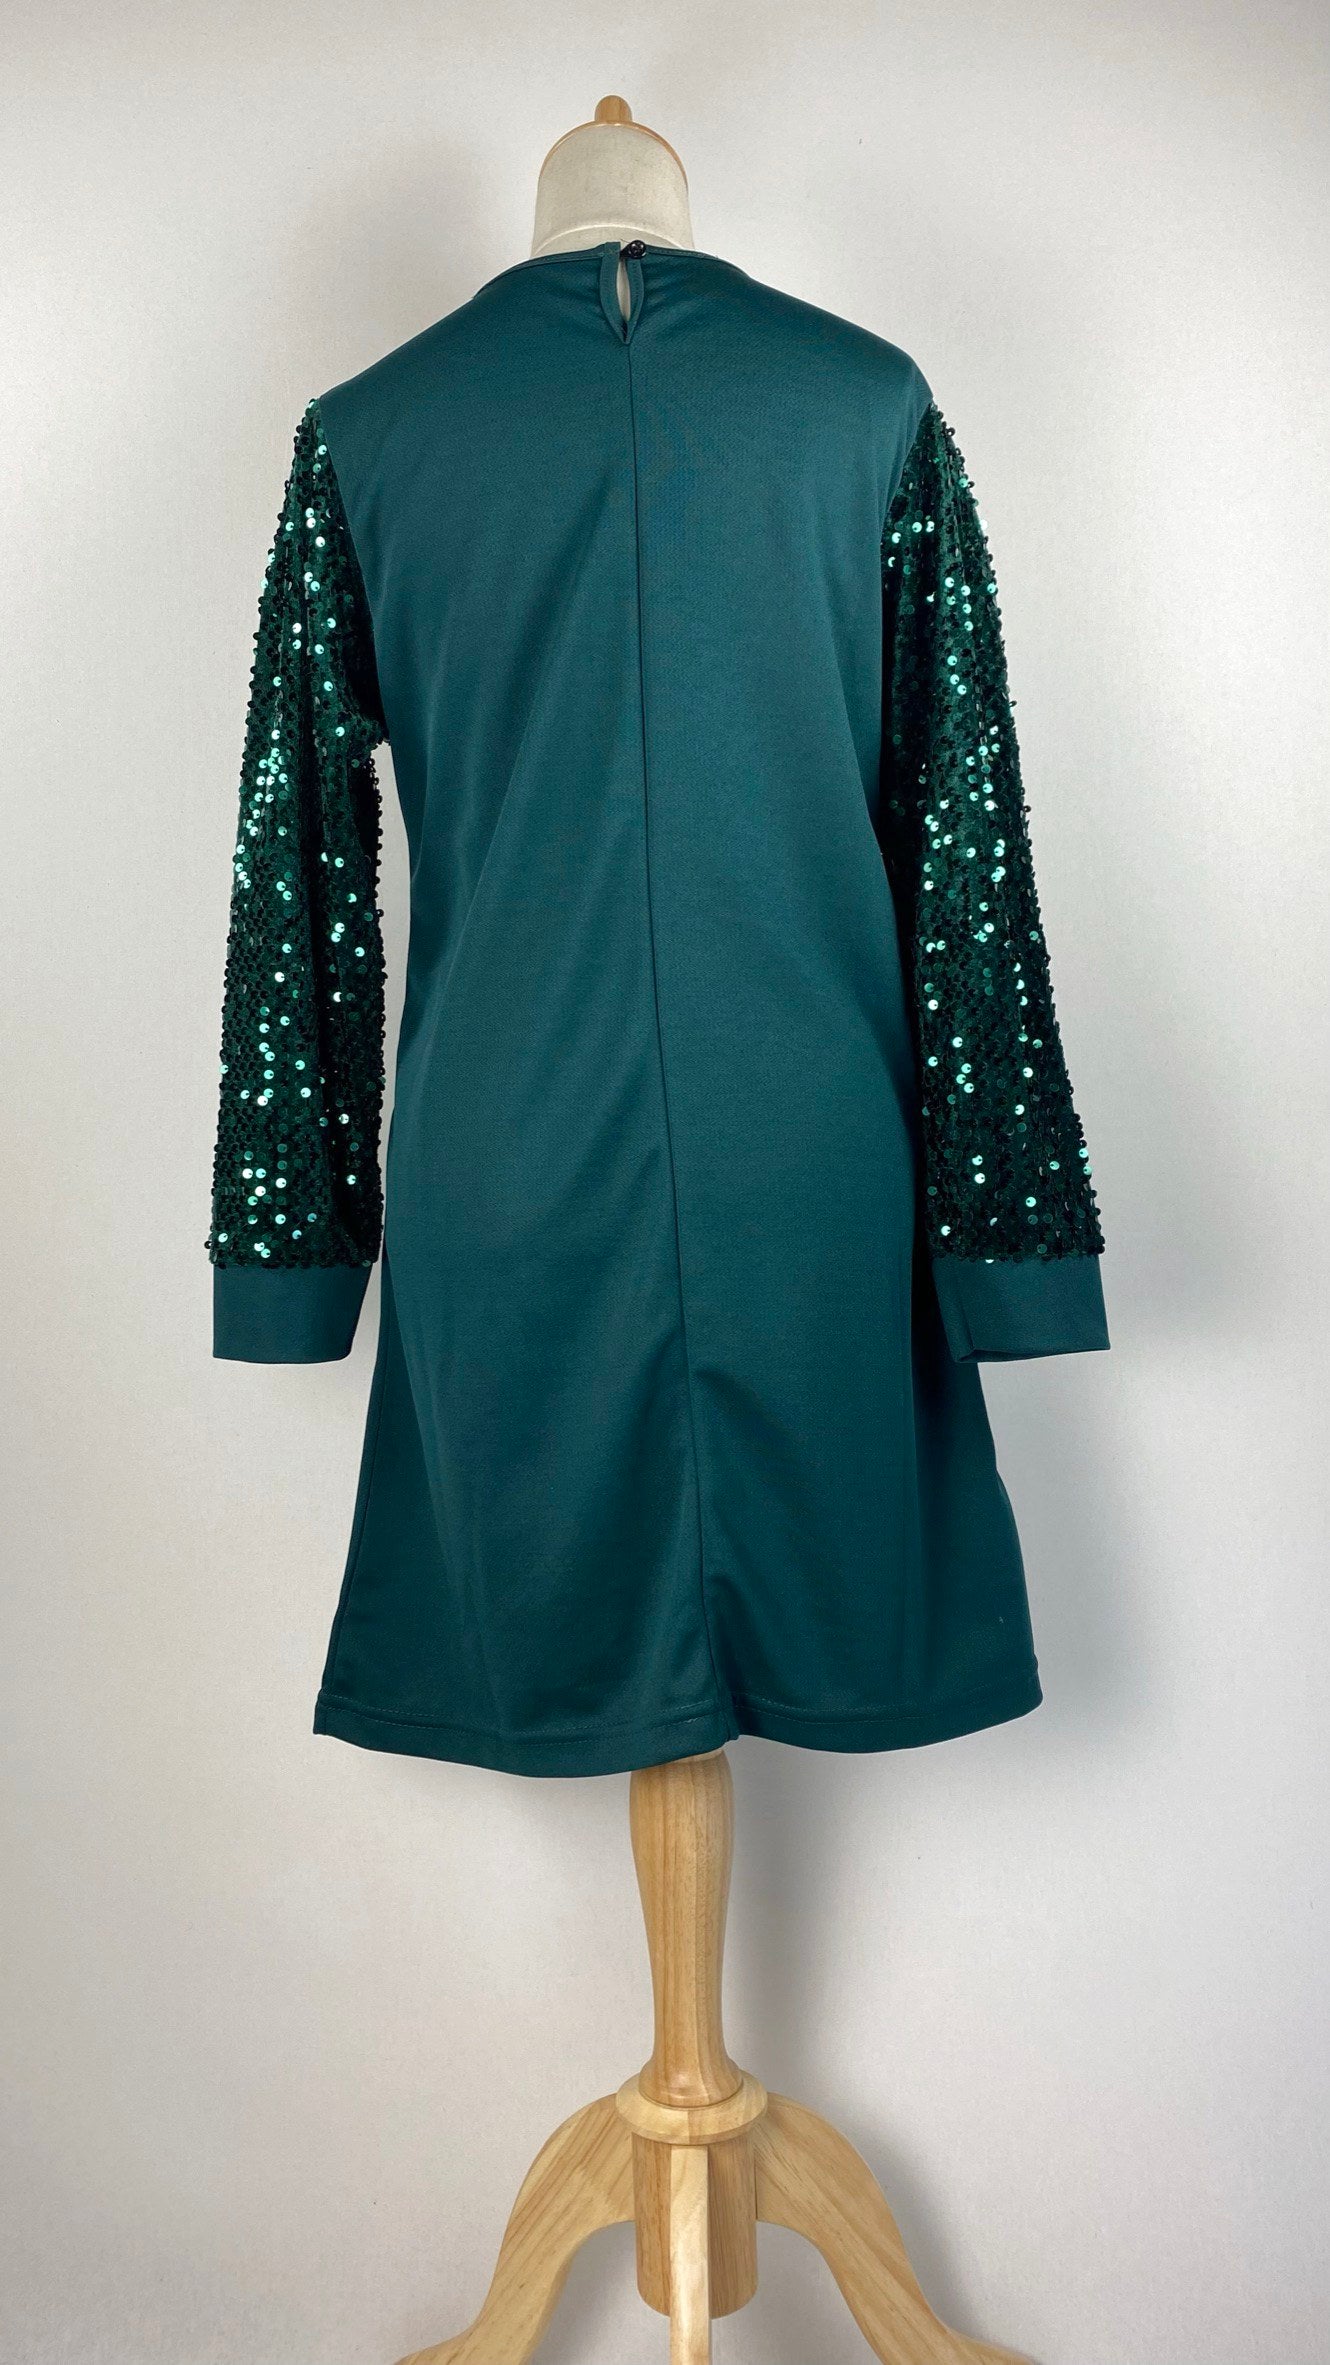 Long Sleeve Knee Length Top with Sequins, Green